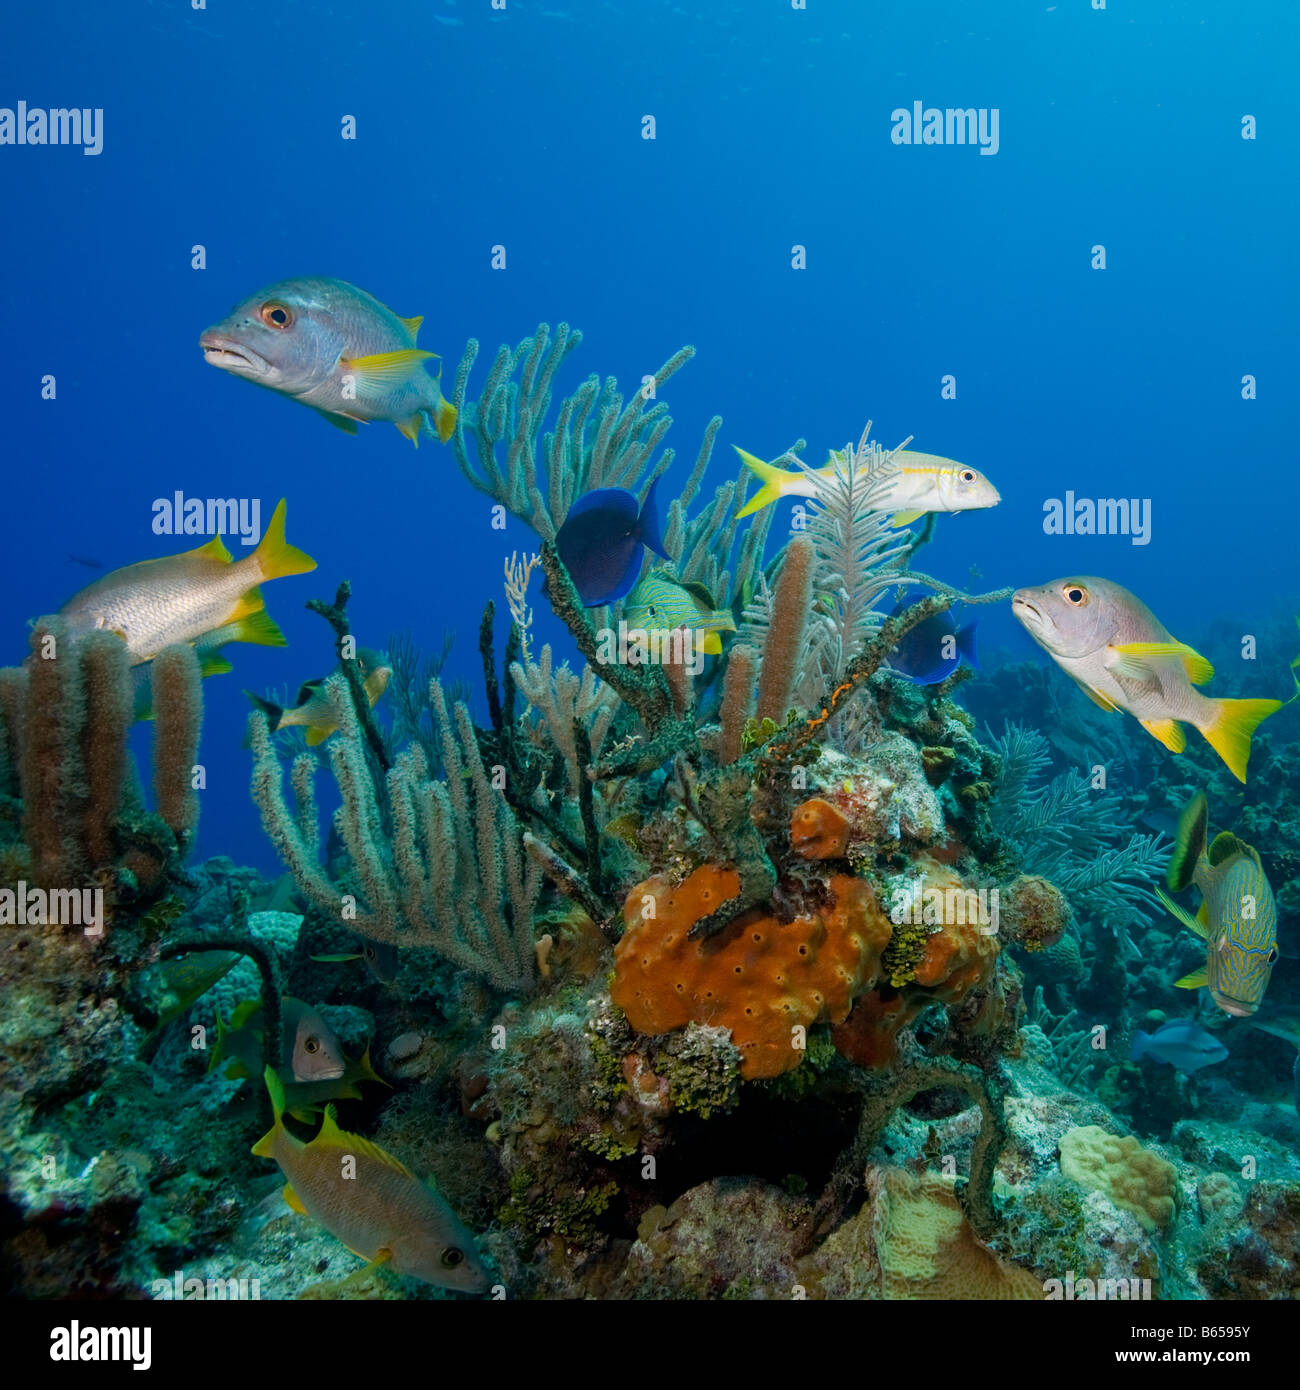 Cayman Islands Little Cayman Island Underwater View Of Tropical Fish